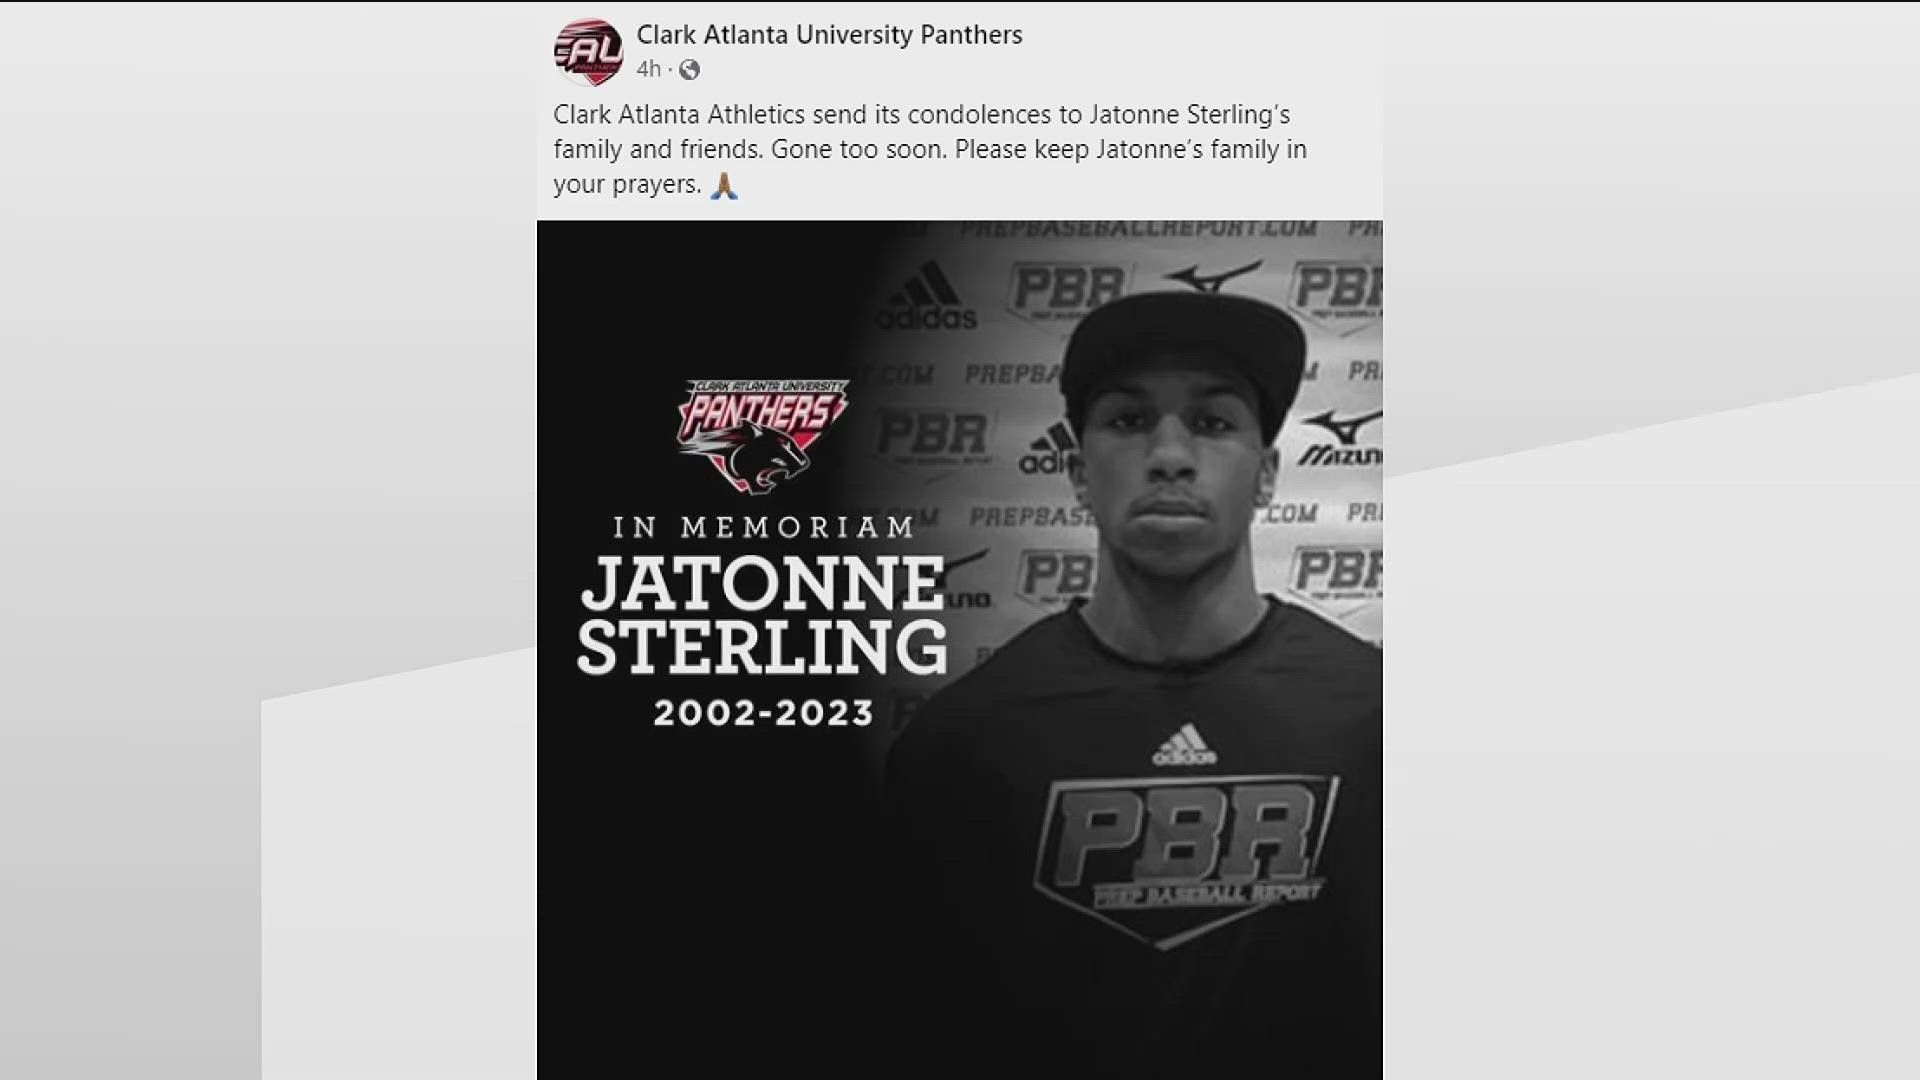 The Fulton County Medical Examiner later identified the 20-year-old killed as Jatonne Sterling. He was a member of CAU's baseball team, the university said.